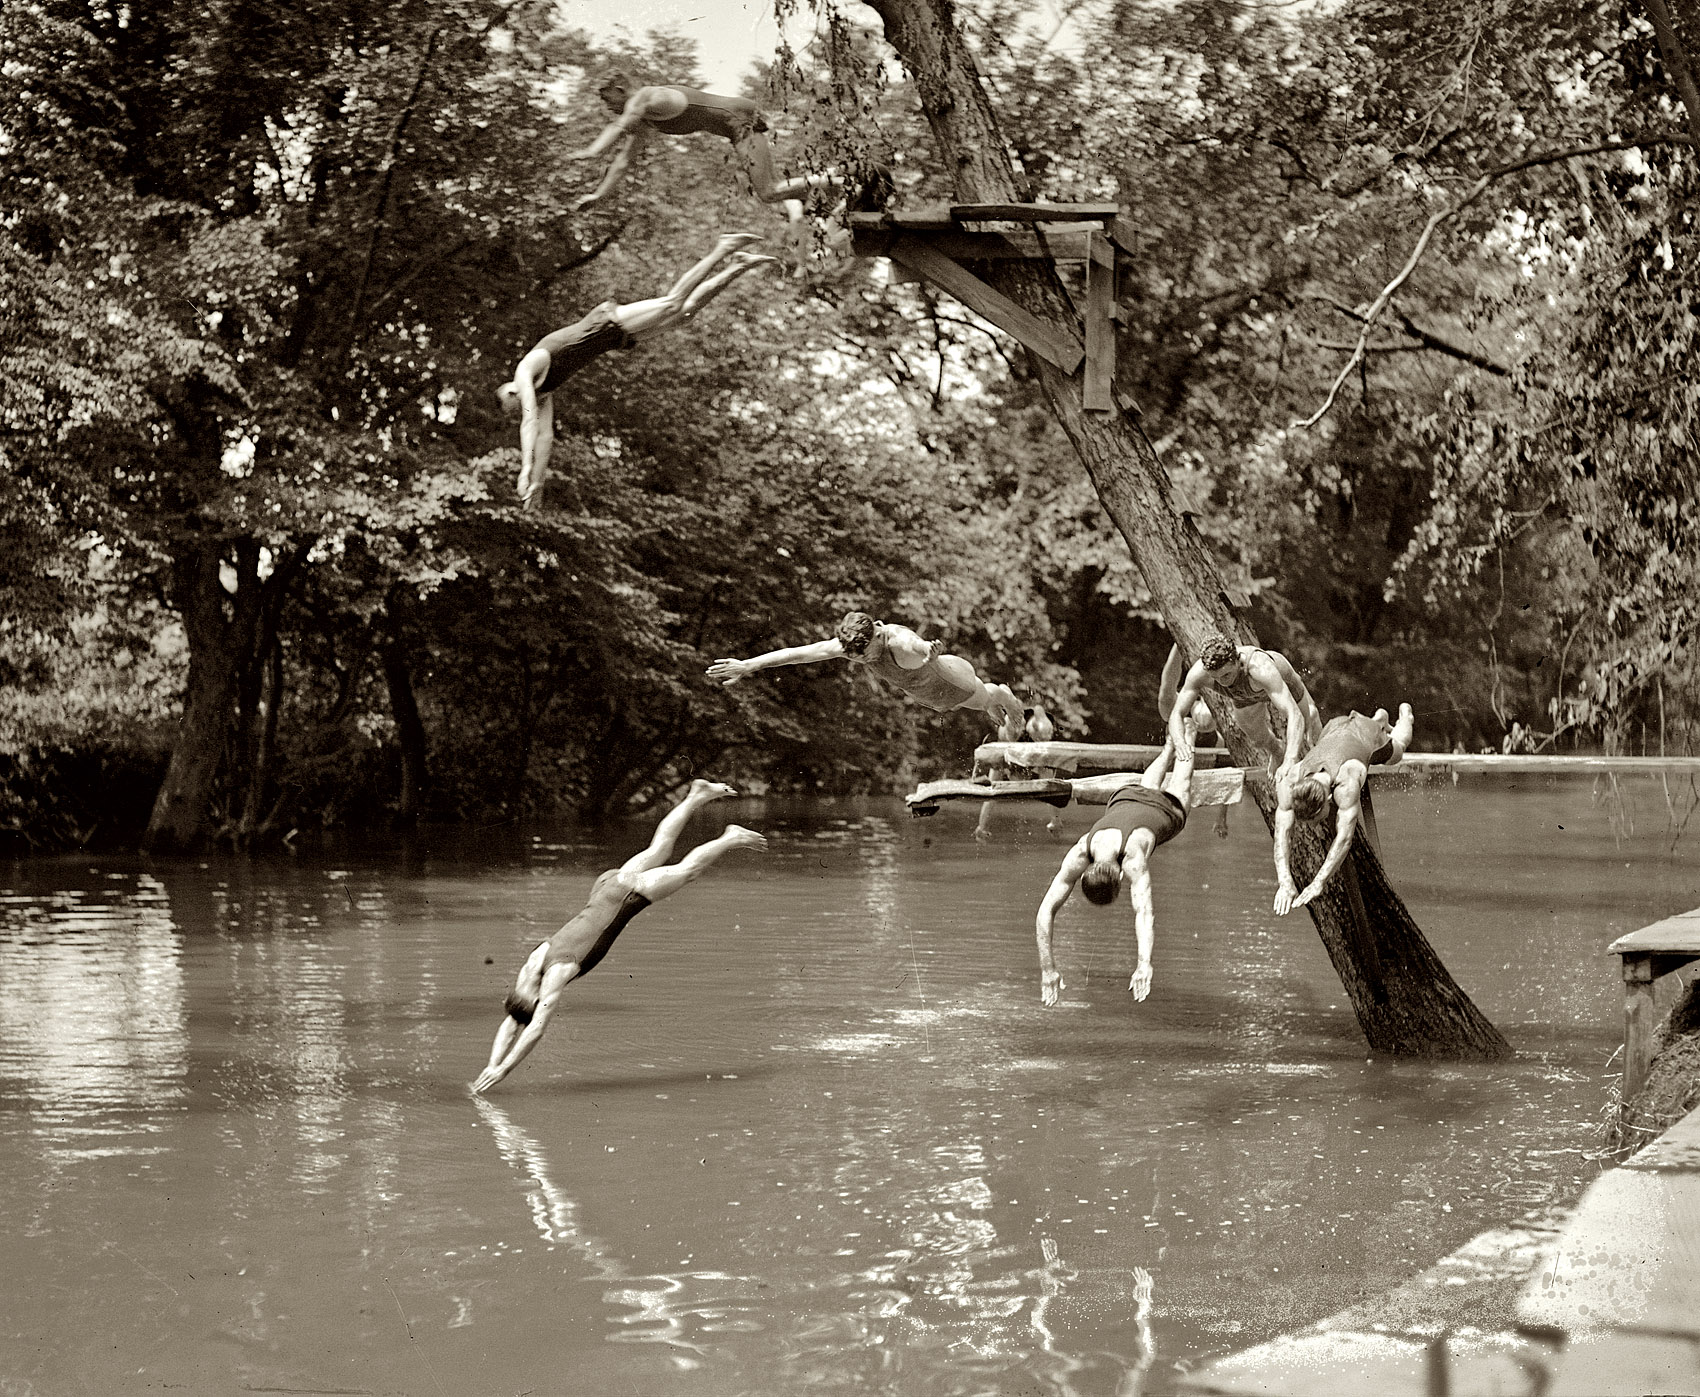 August 21, 1922. "Citizens' Military Training Camp, Camp Meade" (Fort Meade, Md.). National Photo Co. View full size. Nowhere on the Internet will you find a picture of more guys simultaneously jumping off a tree than the 10 shown here.